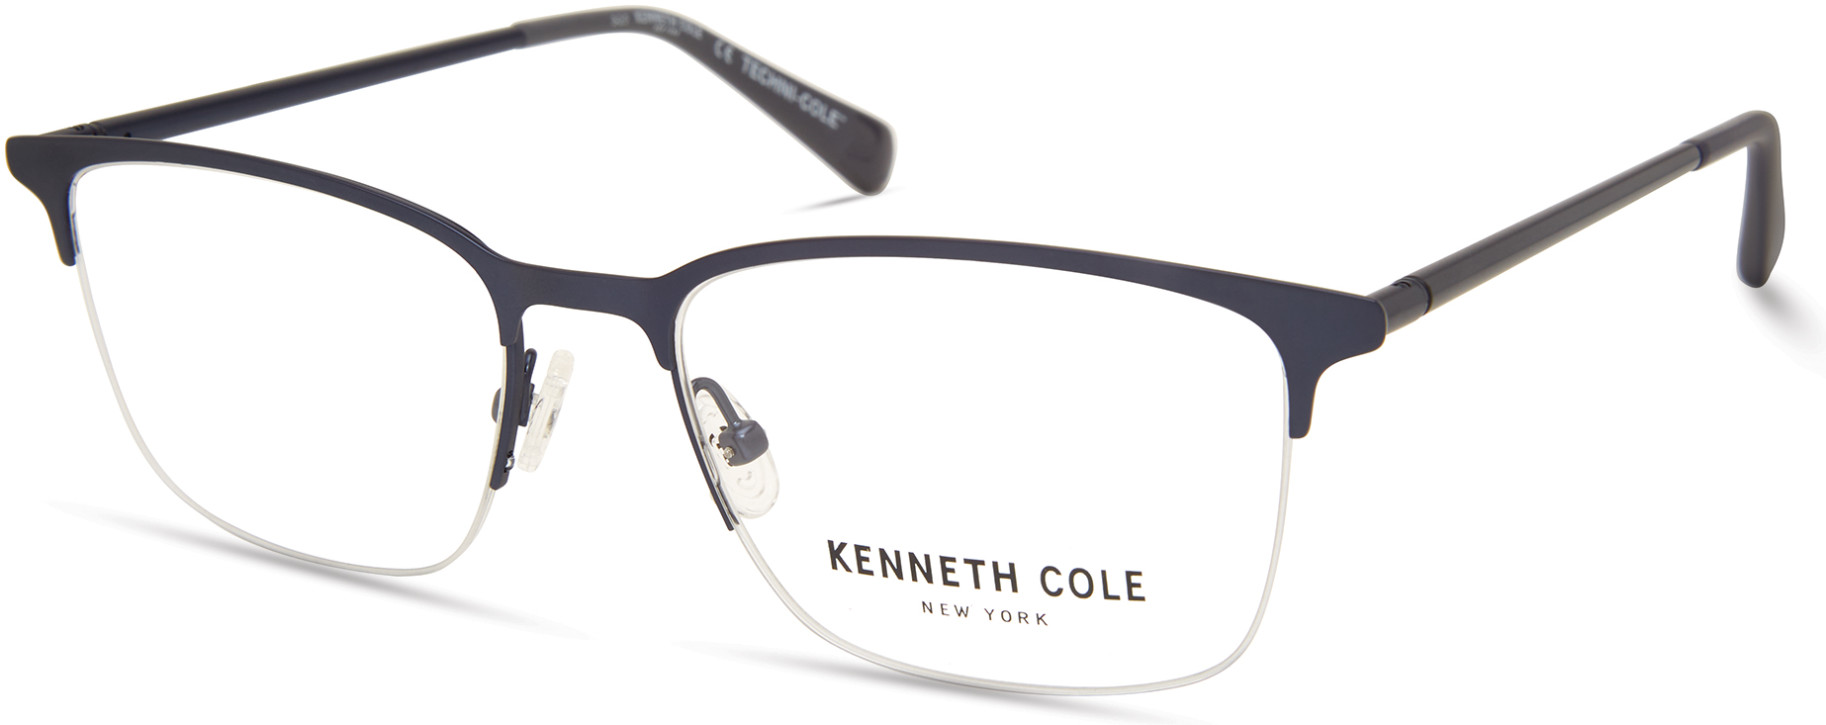 KENNETH COLE NY 0322 091